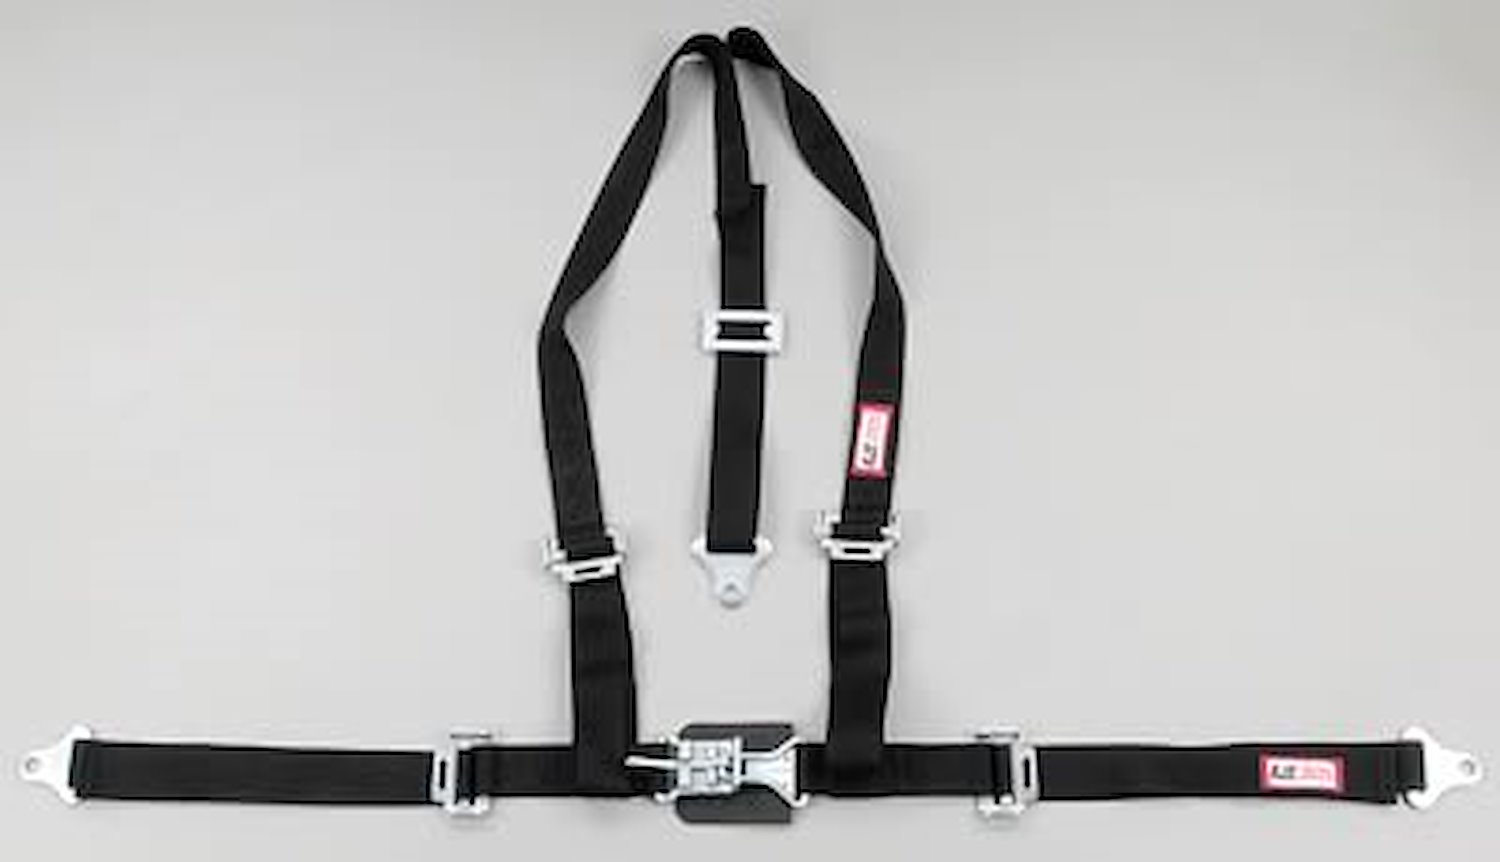 NON-SFI L&L HARNESS 2 PULL DOWN Lap Belt SNAP SEWN IN 2 S.H. INDIVIDUAL FLOOR Mount w/STERNUM STRAP WRAP/SNAP BLACK